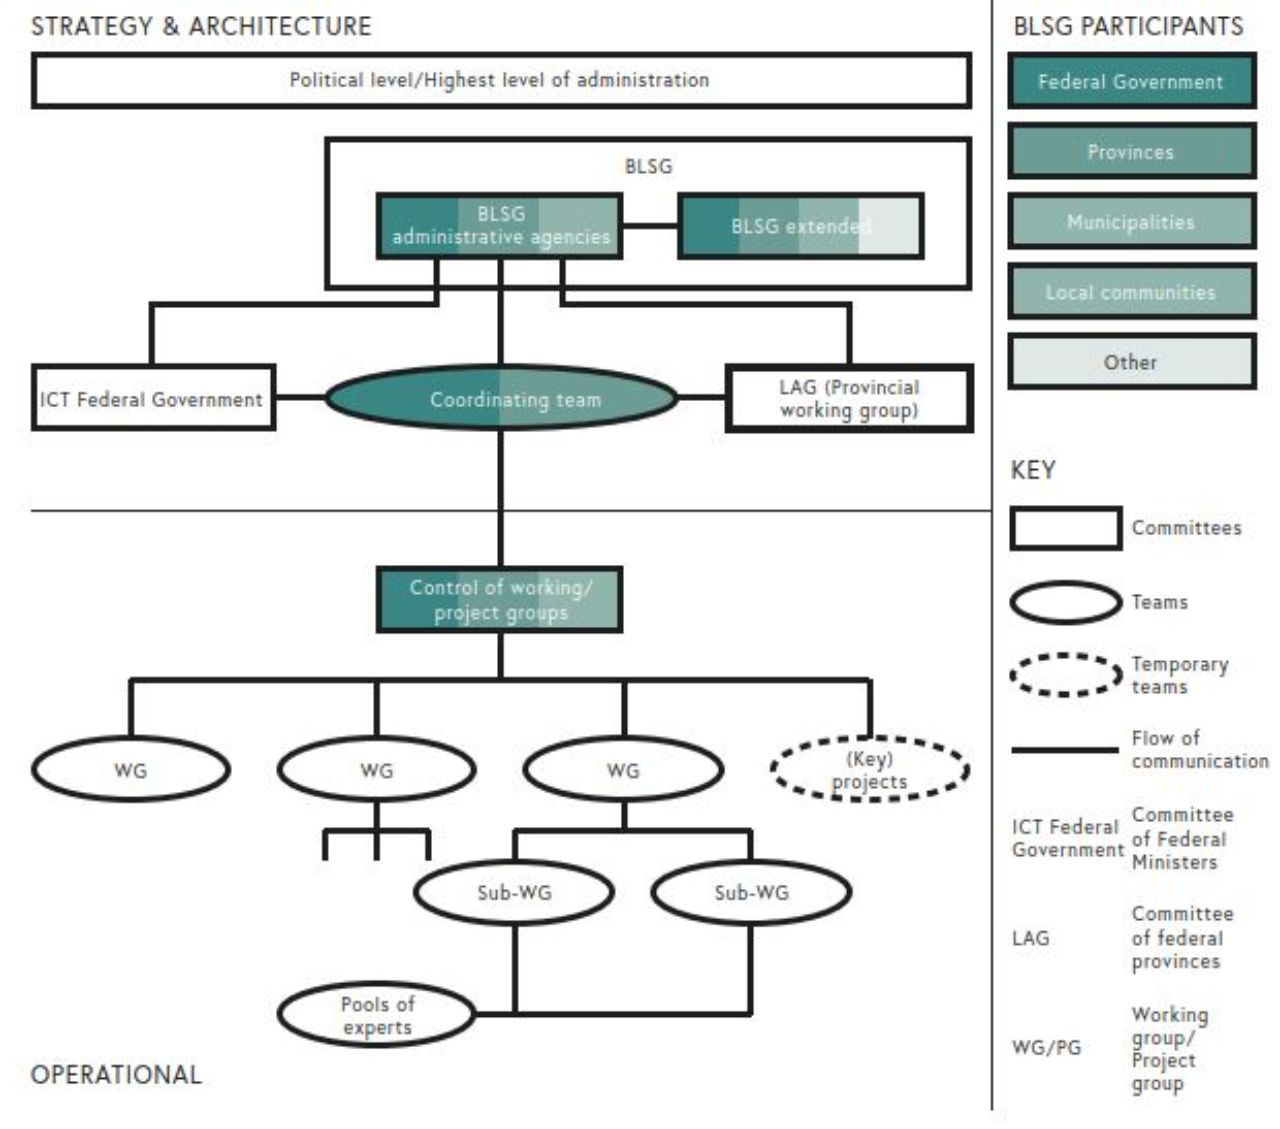 Displays content, organigram with strategy and architecture and participants as well as the legend in 4 areas. Contents include overarching standards, interfaces, principles and framework conditions; government components and concepts; cooperation projects and initiatives; joint roadmap, impulses and active information on laws and other. The organisational chart shows the structures of the political level and the highest administrative level in Austria for cooperation in eGovernment. Participants are therefore representatives from the federal government, the provinces, cities, municipalities, and other stakeholders. Legend for committees, teams and temporary teams